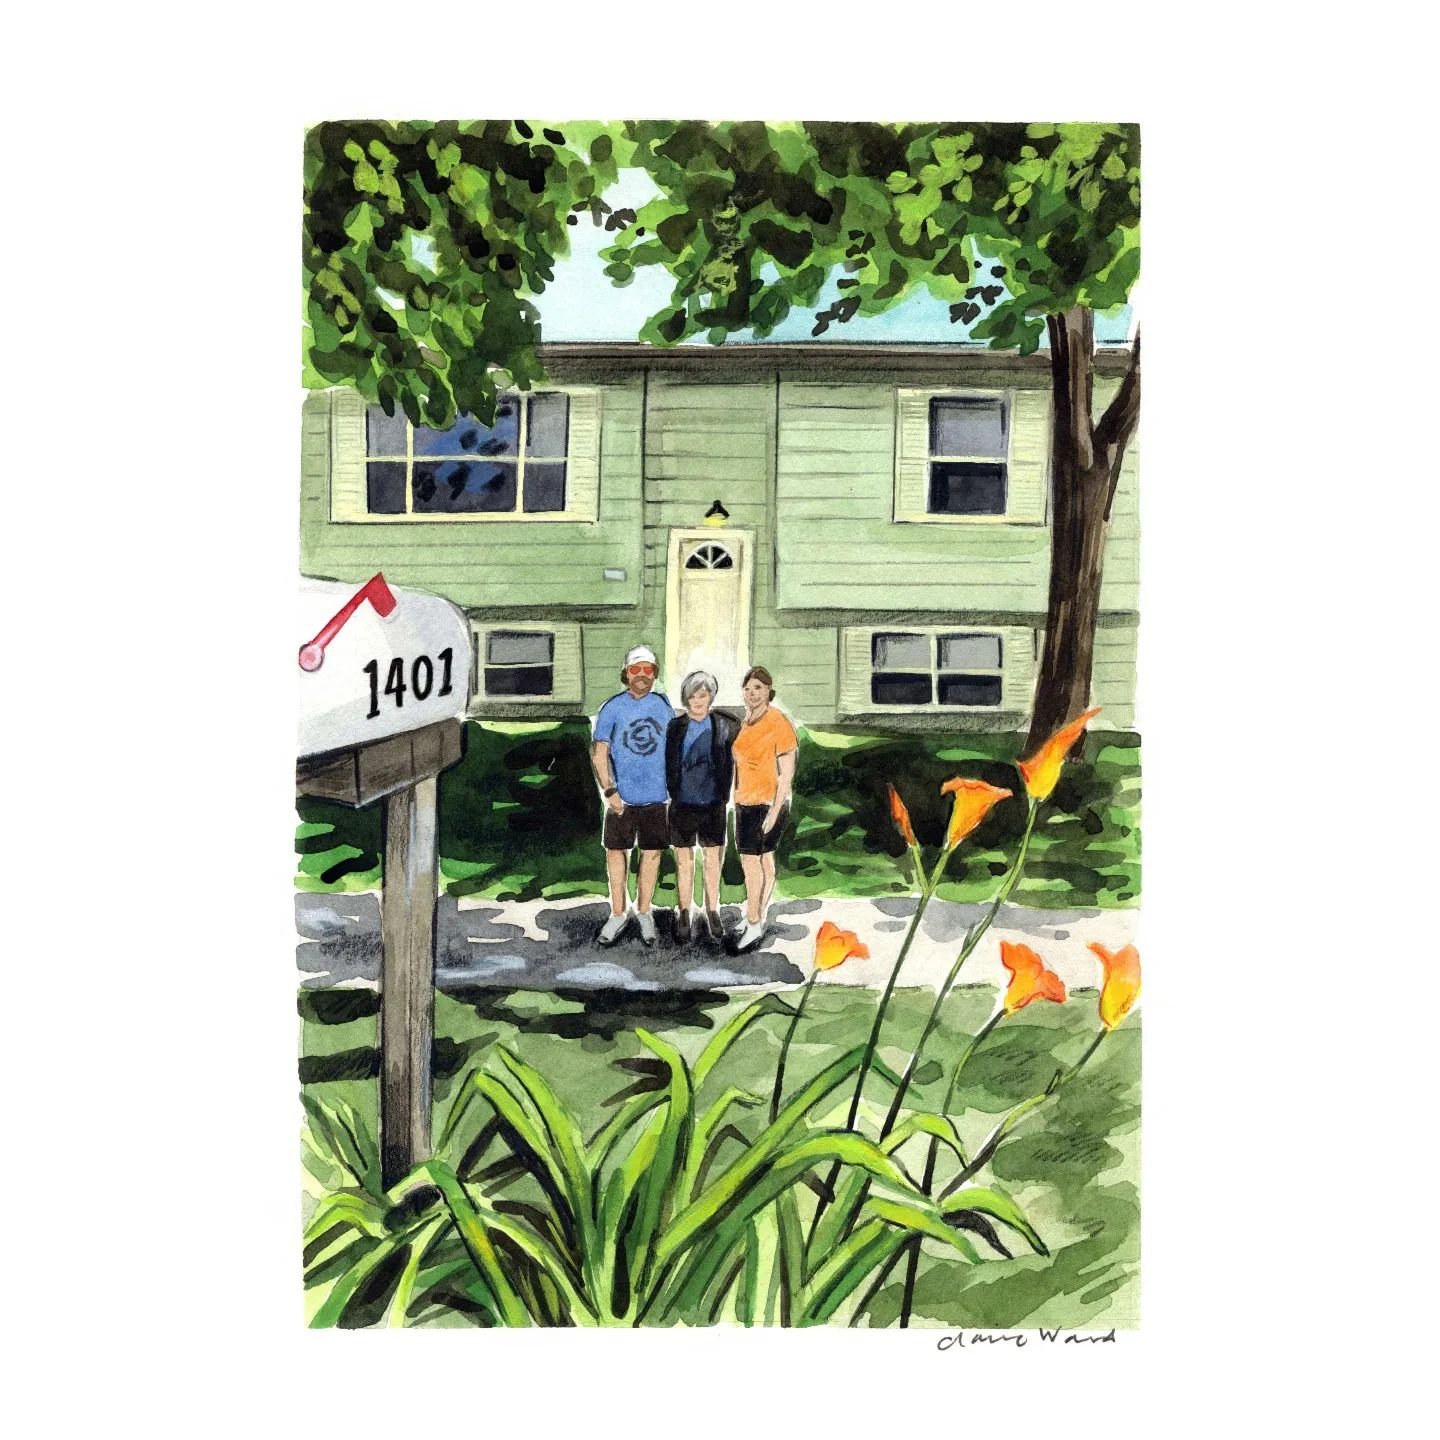 I love the flowers and mailbox in the foreground of this one! 

#familyportraits #houseillustration #houseportrait #family #illustration #illustratorsoninstagram #customportrait #customillustration #commissionedart #commission #customart #watercolor 